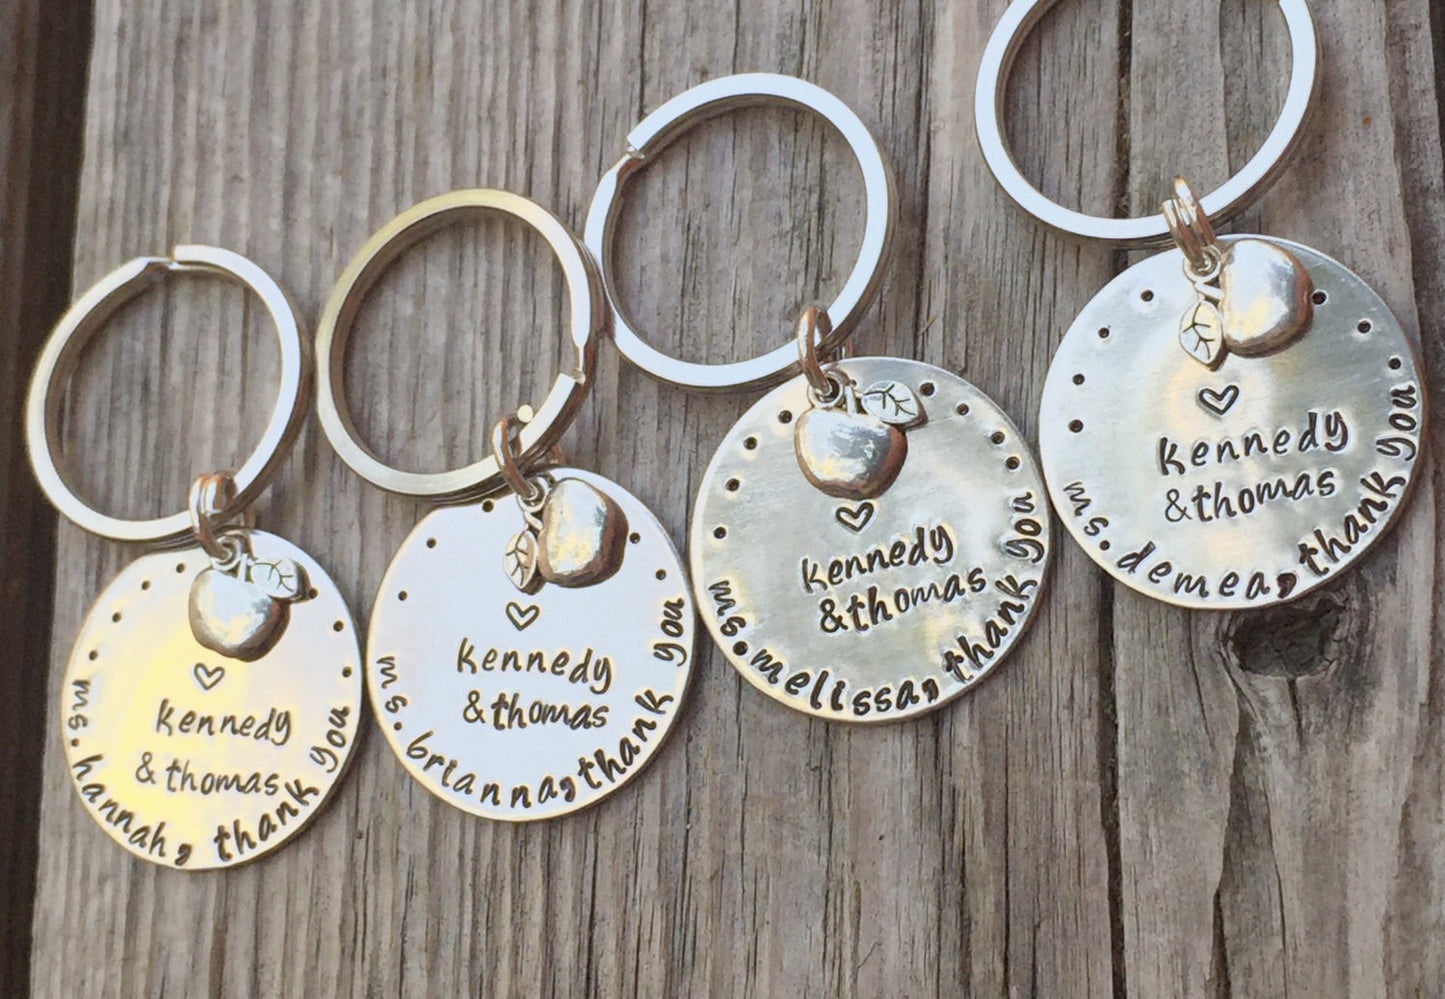 teacher gift, thank you gift, teacher appreciation, teacher keychain, personalized gifts, natashaaloha, gifts - Natashaaloha, jewelry, bracelets, necklace, keychains, fishing lures, gifts for men, charms, personalized, 